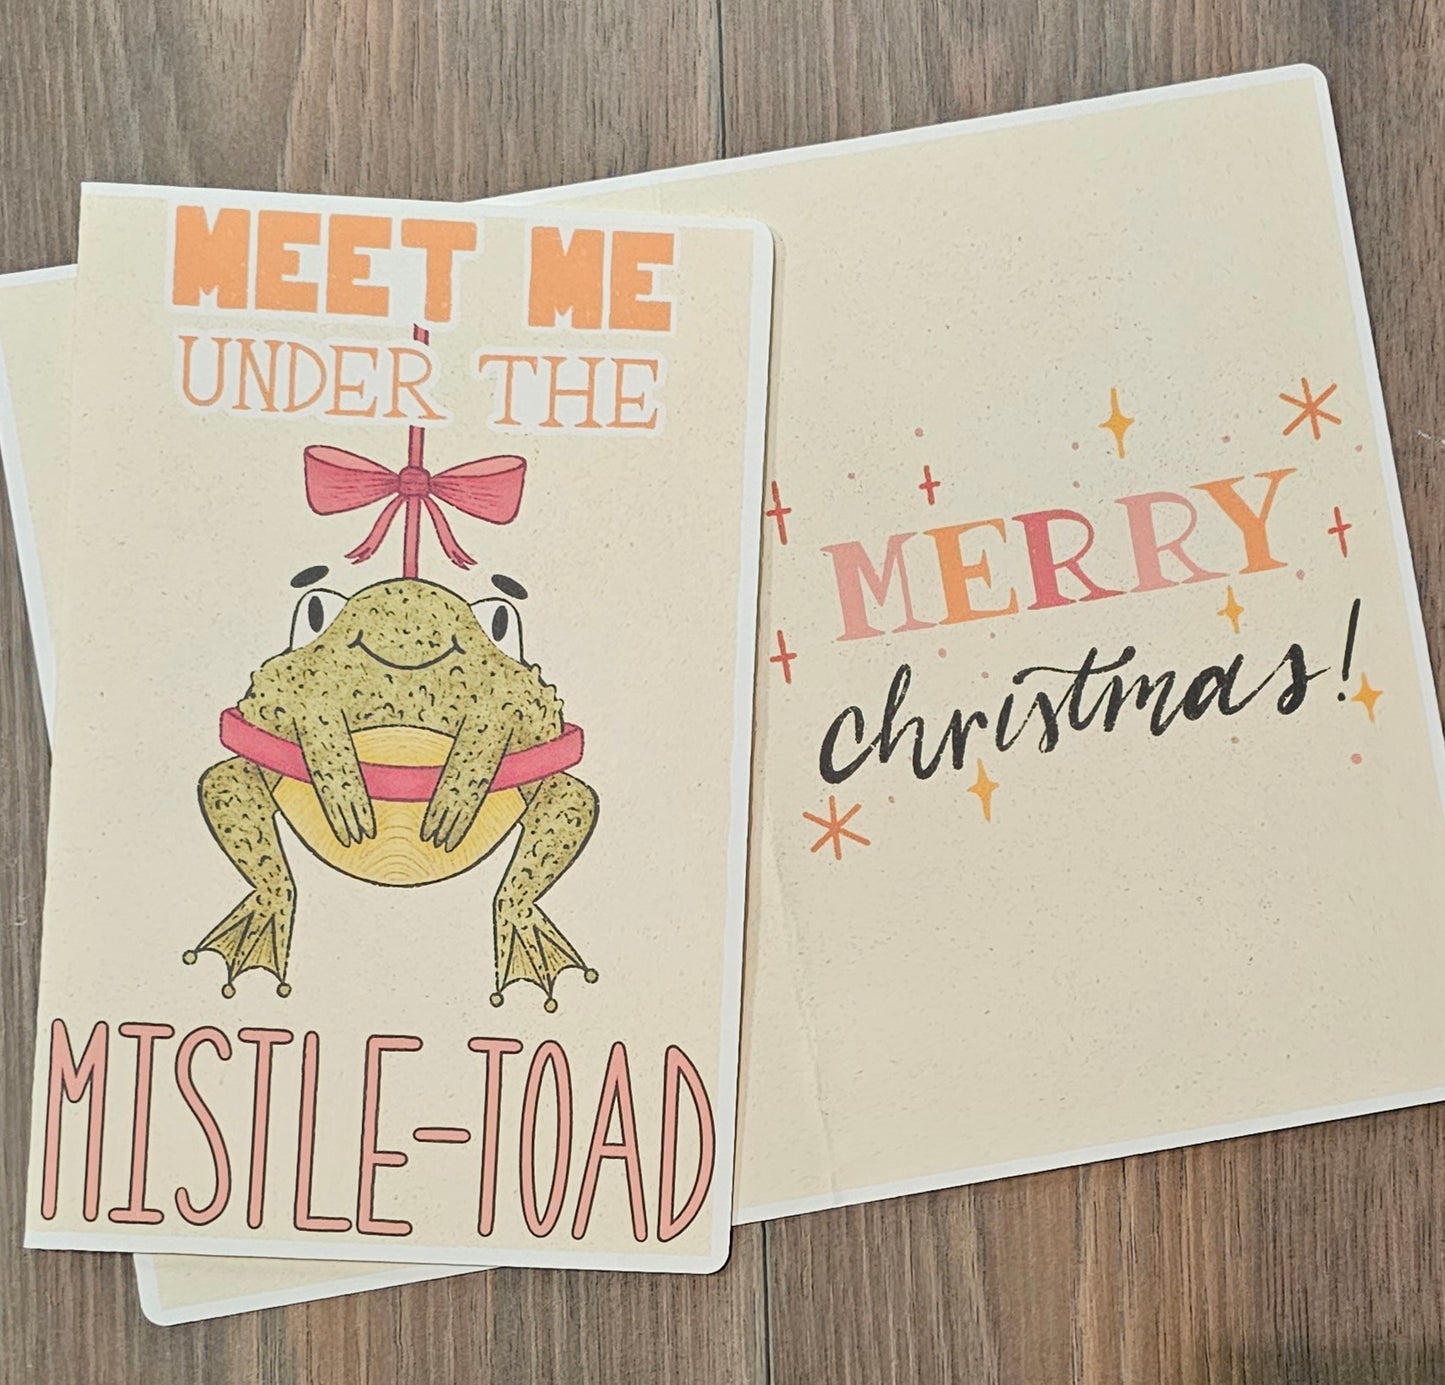 Mistel-toad Greeting Cards | Pack of 5